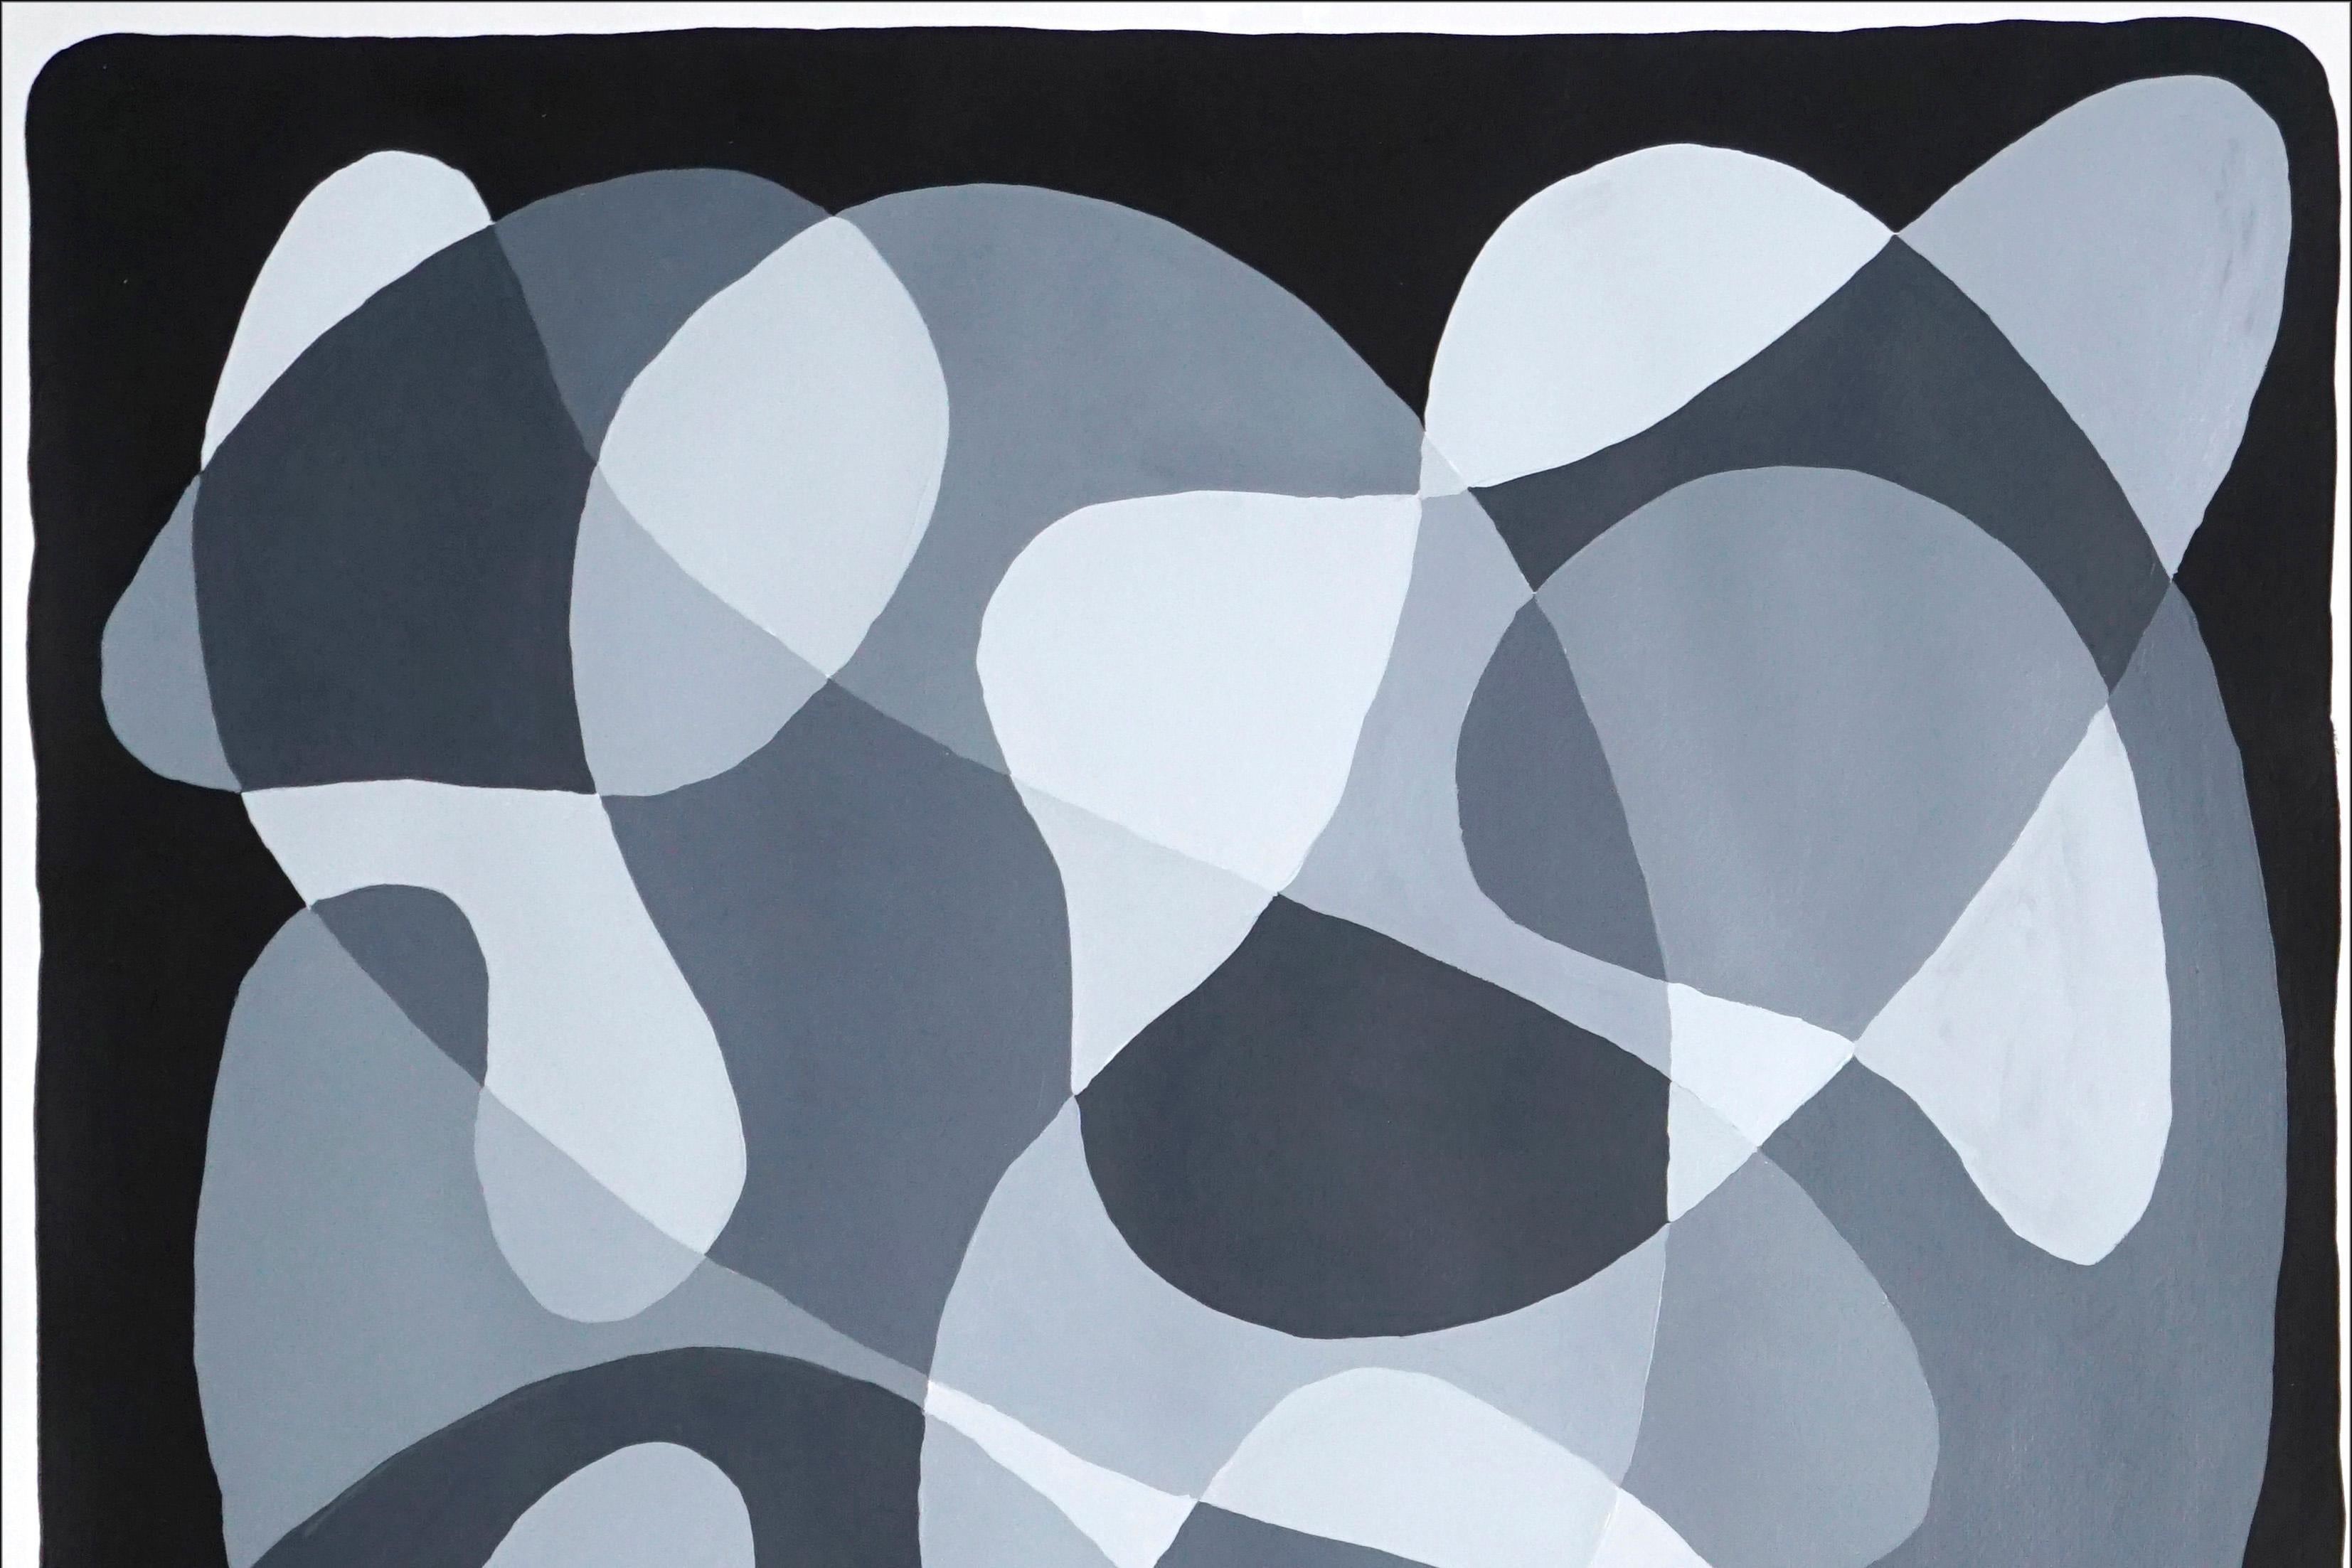 Black and White Curvy Flow, Mid-Century Modern Shapes and Layers Painting, Paper - Gray Abstract Painting by Ryan Rivadeneyra